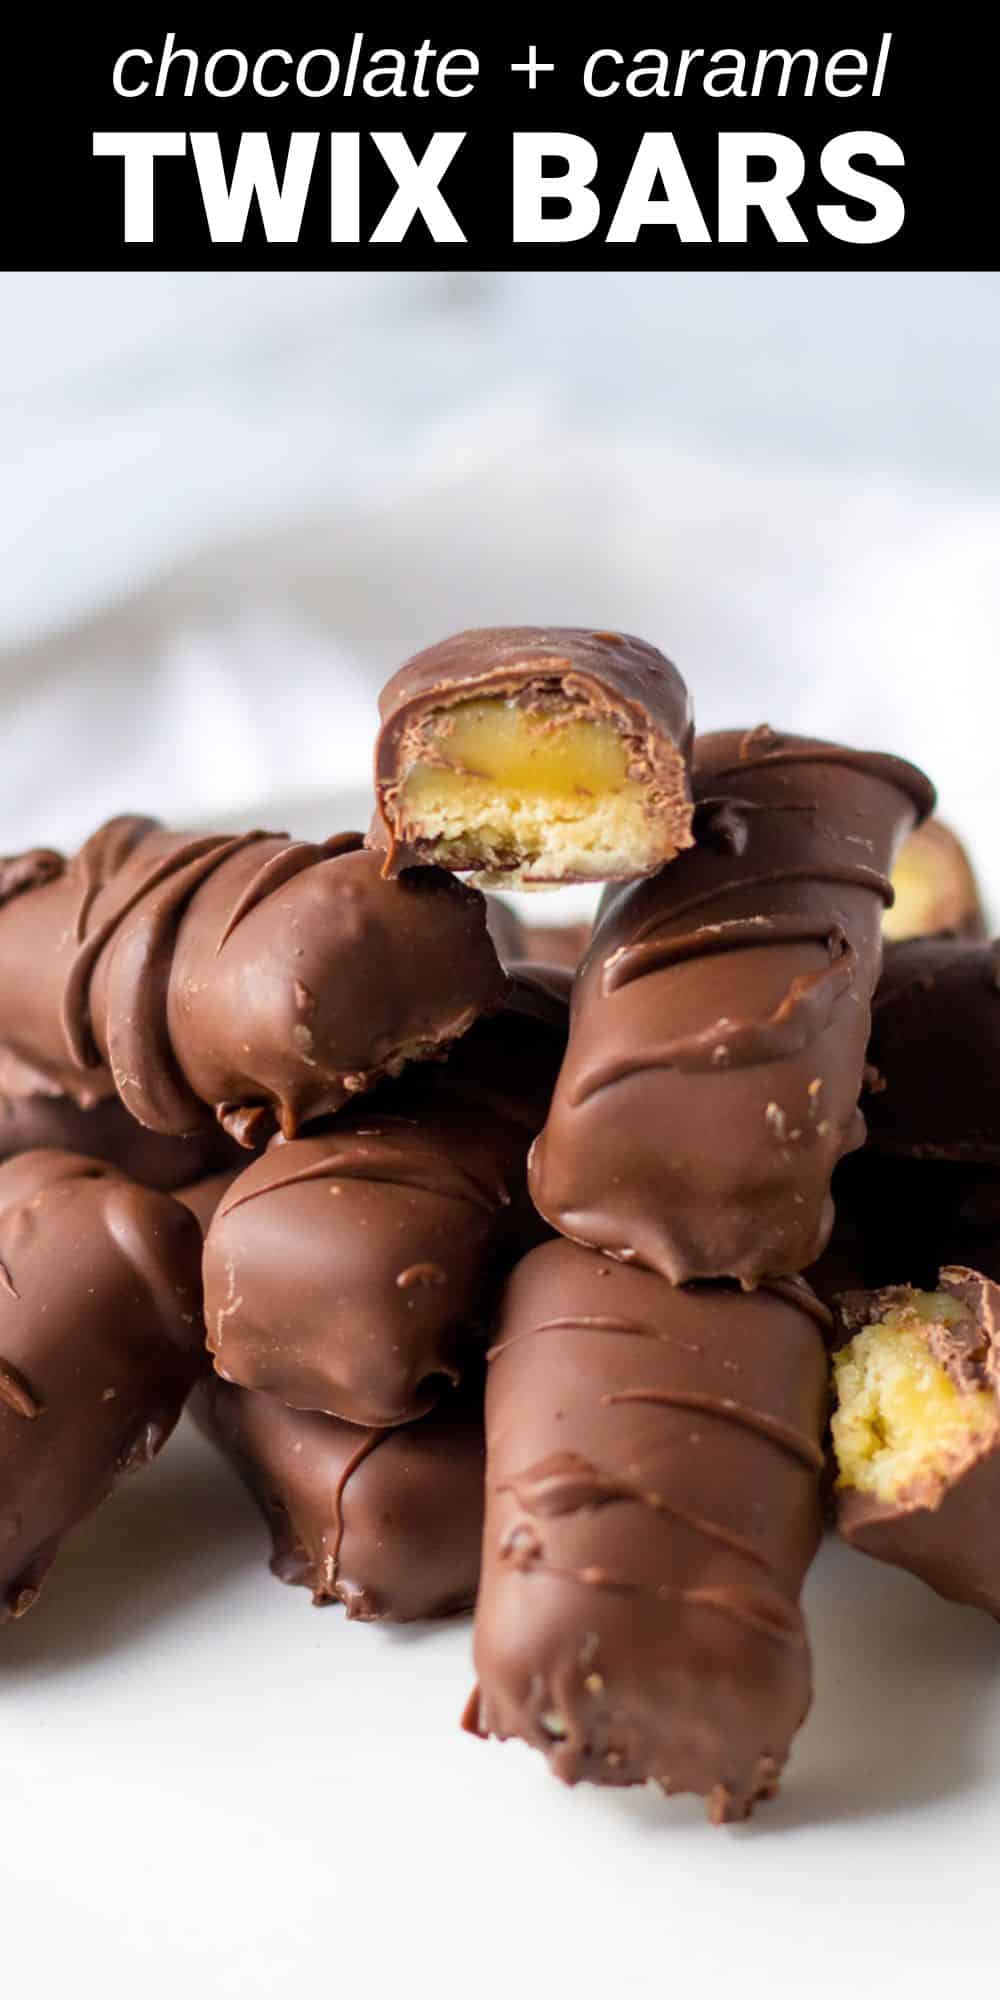 This Homemade Twix Bars recipe tastes just like the original classic candy bars with a delicious combination of milk chocolate and chewy caramel that's nestled on a layer of buttery shortbread.